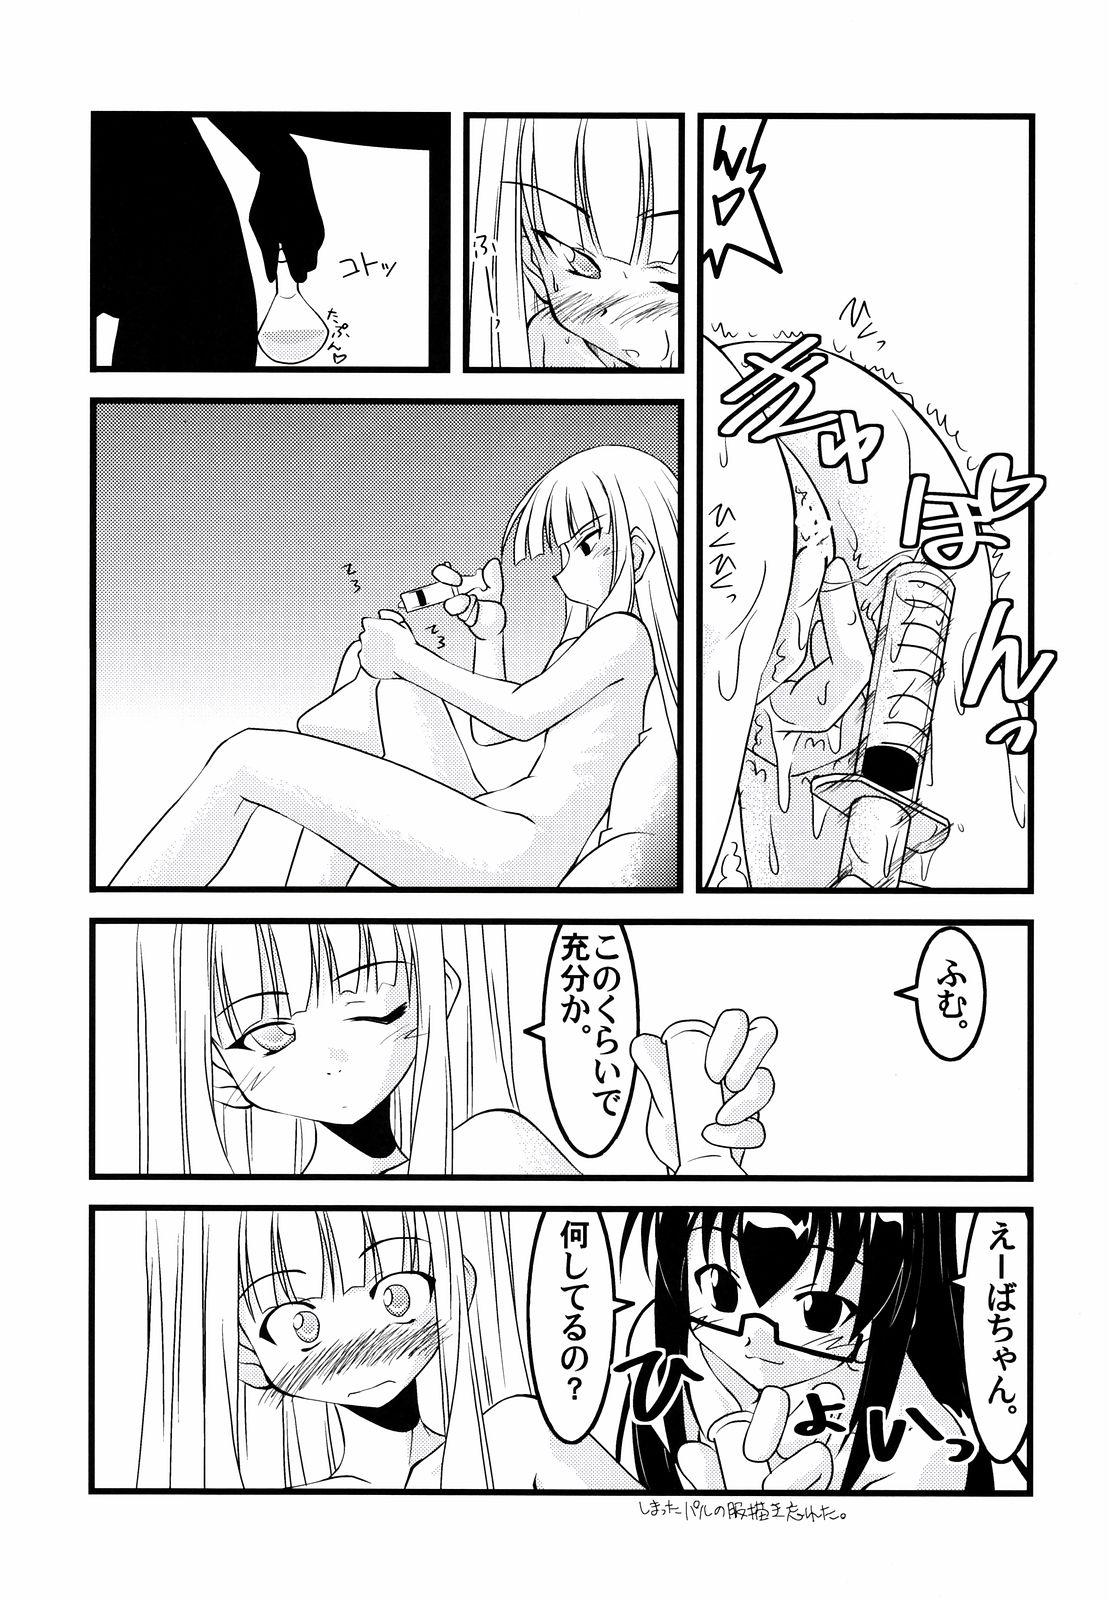 Fucking Pussy Lovelys in the School with Dream 5 - Mahou sensei negima Hymen - Page 4